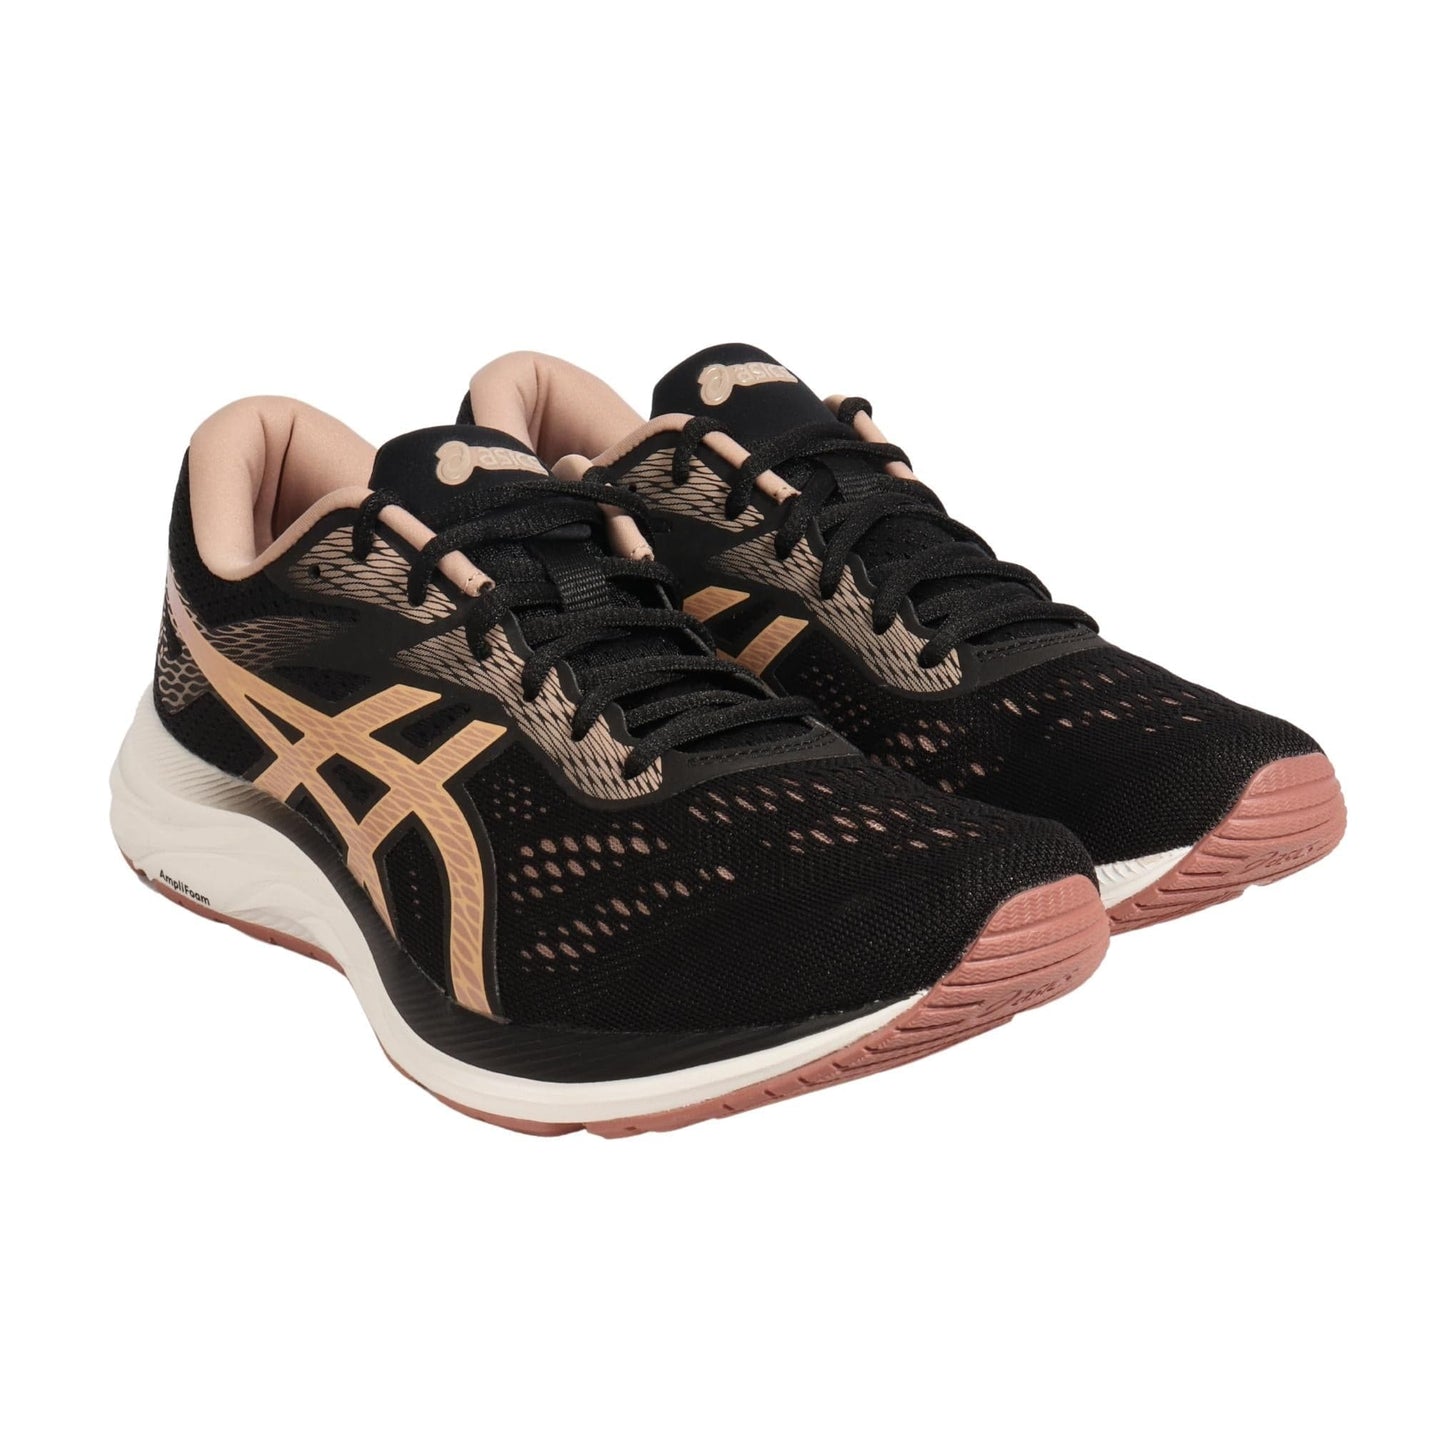 ASICS Athletic Shoes 42.5 / Multi-Color ASICS- Women's GEL-Excite 6 Running Shoes